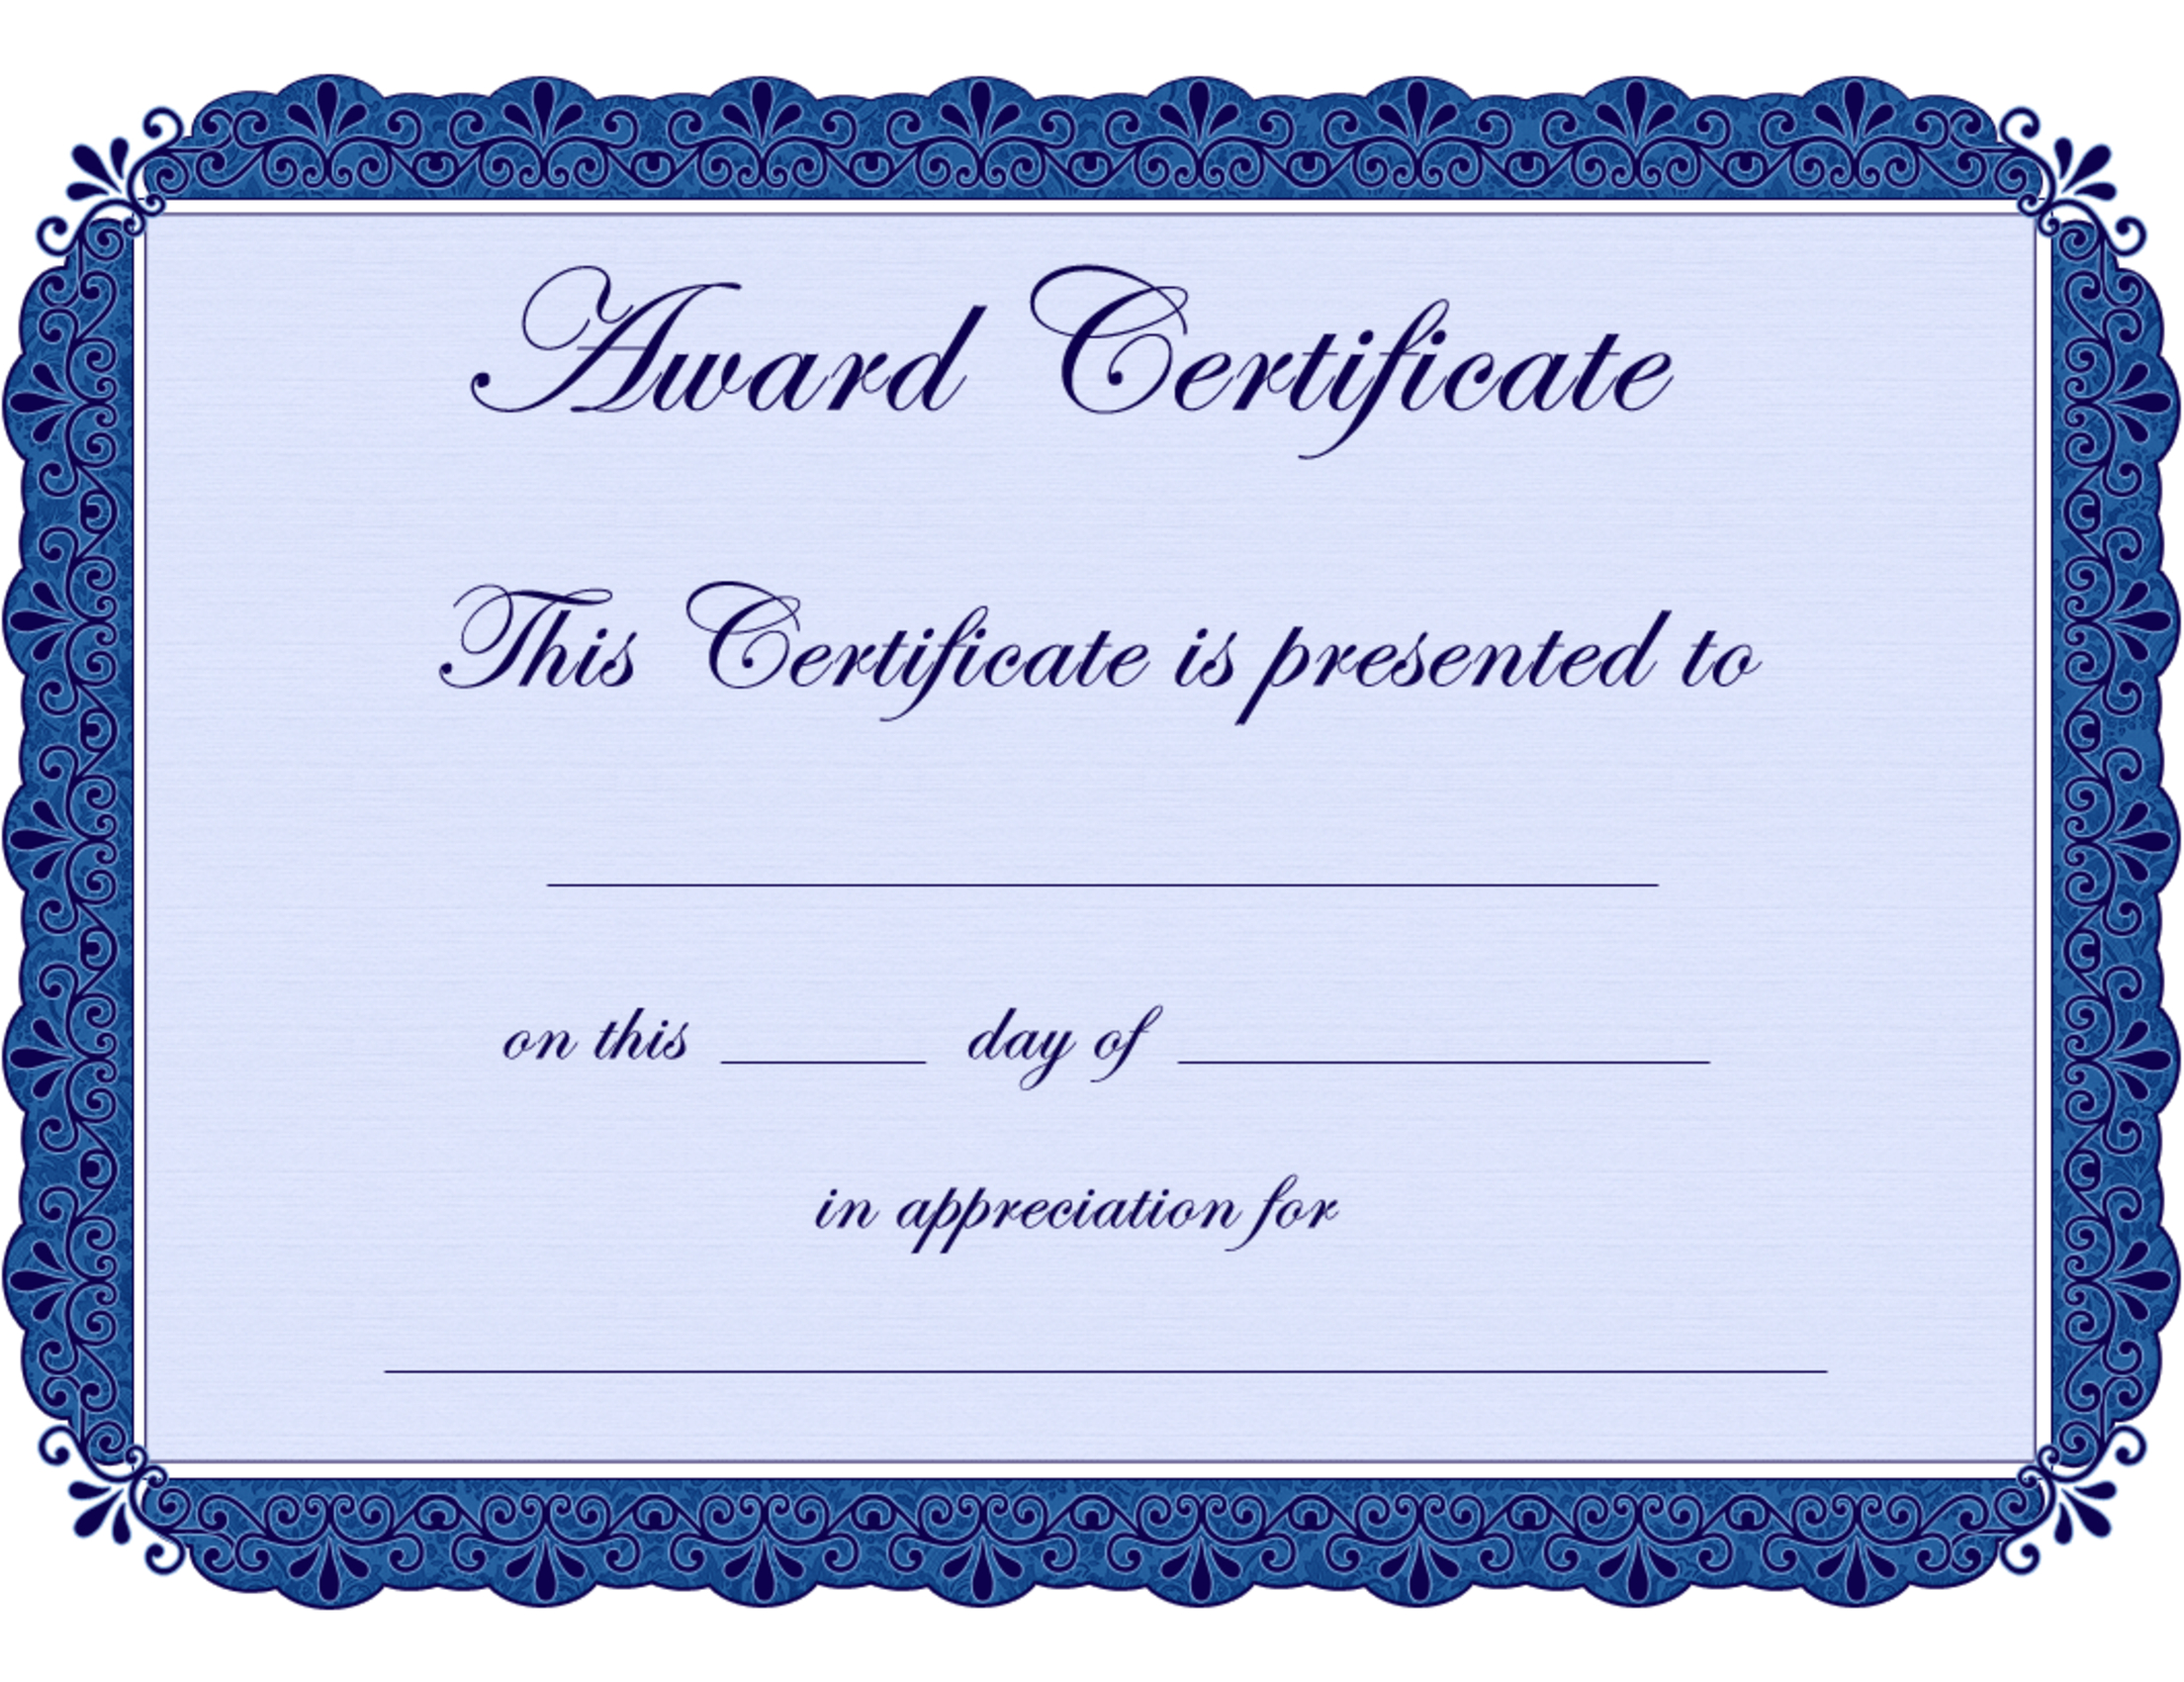 Free Printable Award Certificate Borders |  Award Pertaining To Free Funny Award Certificate Templates For Word